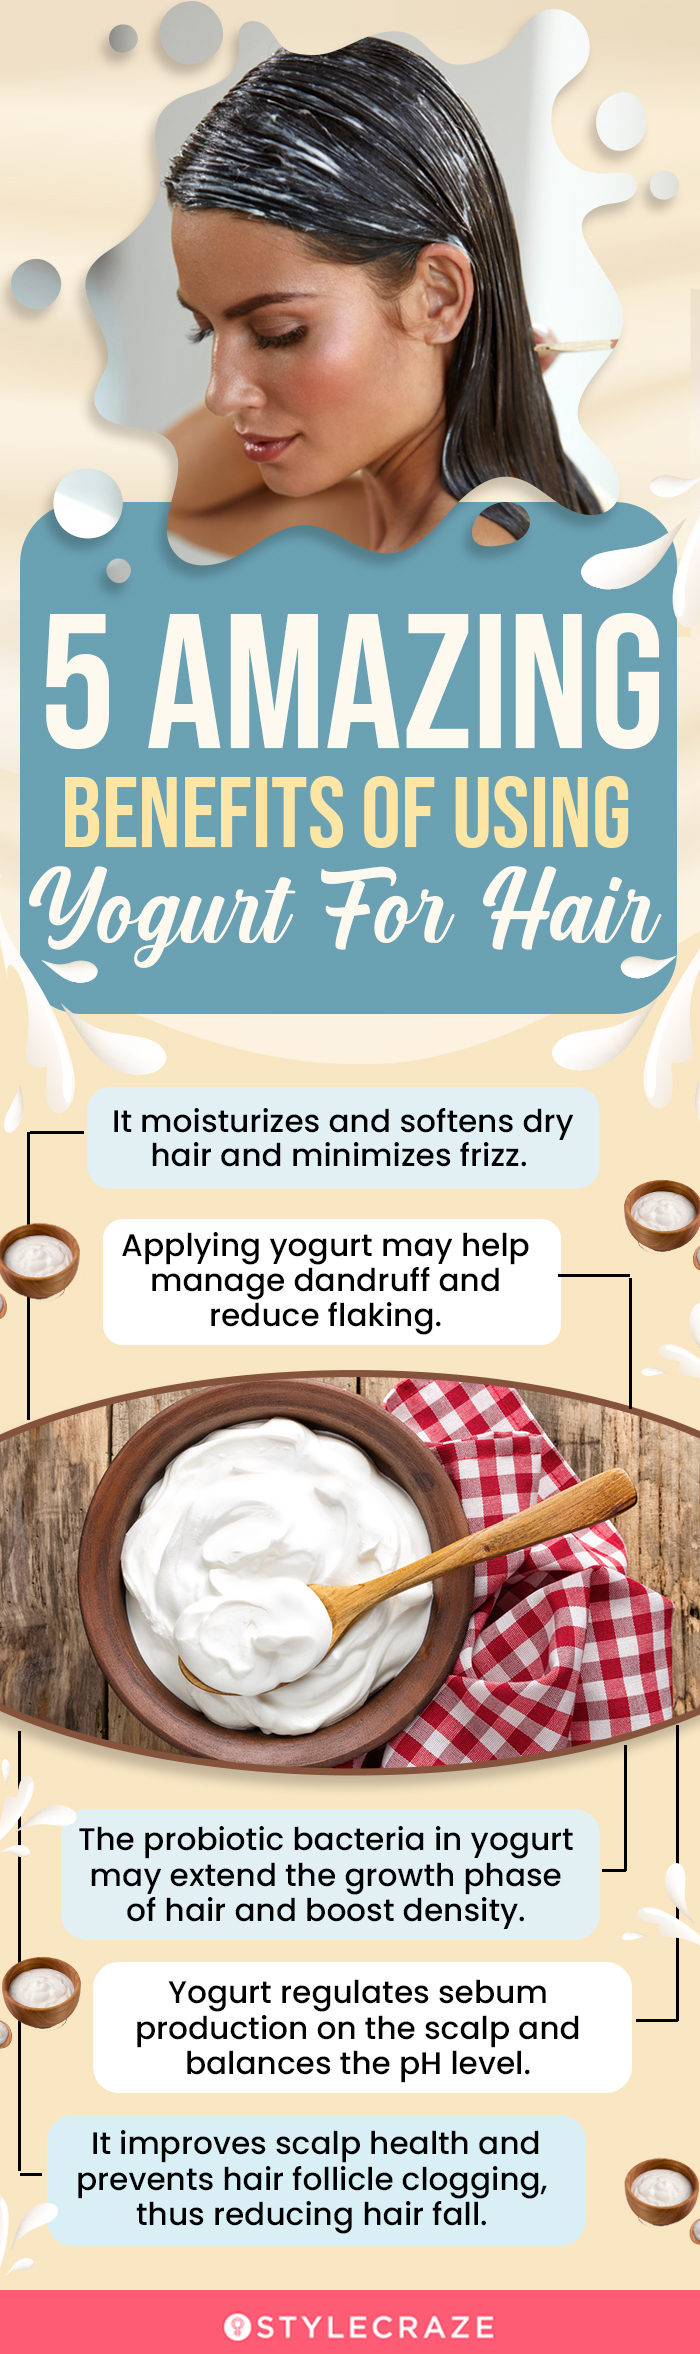 Hair mask recipes for healthy and silky tresses | TheHealthSite.com